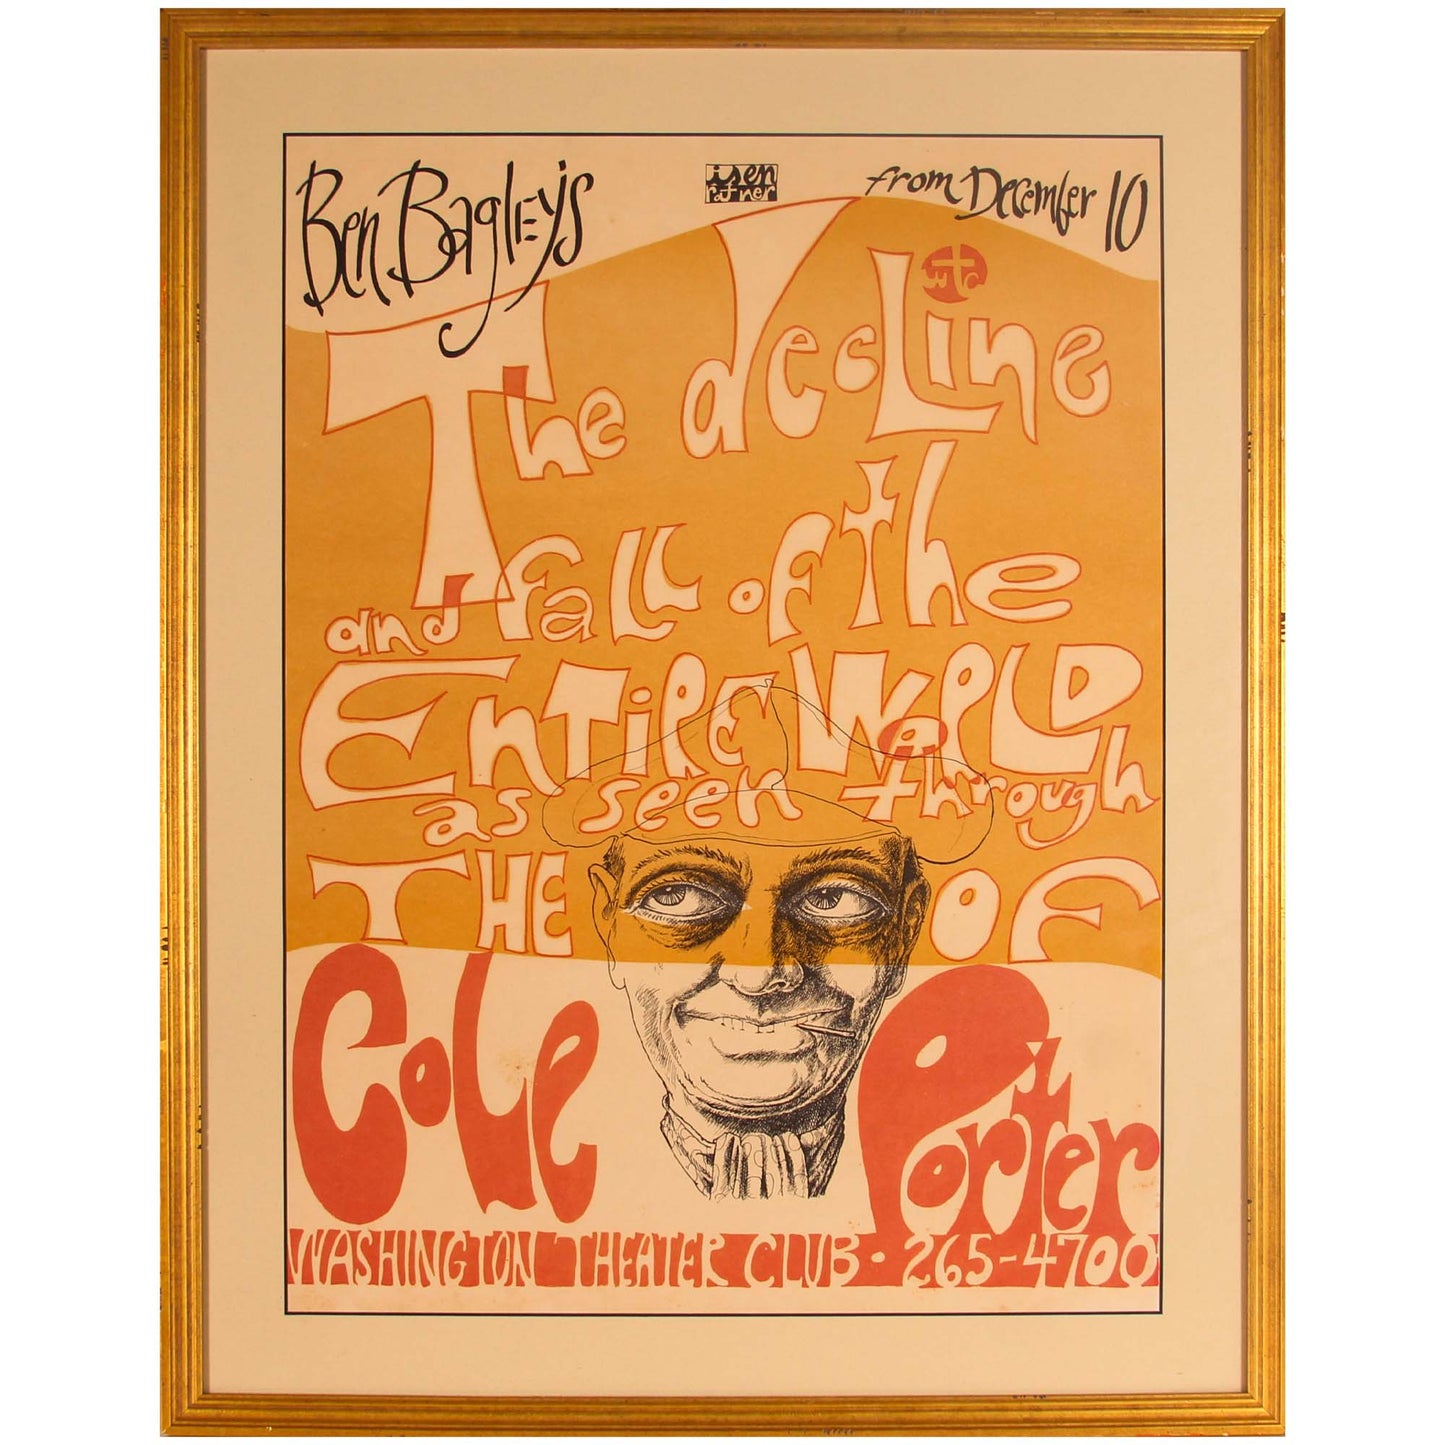 The Decline and Fall of the Entire World As Seen Through the Eyes of Cole Porter Poster